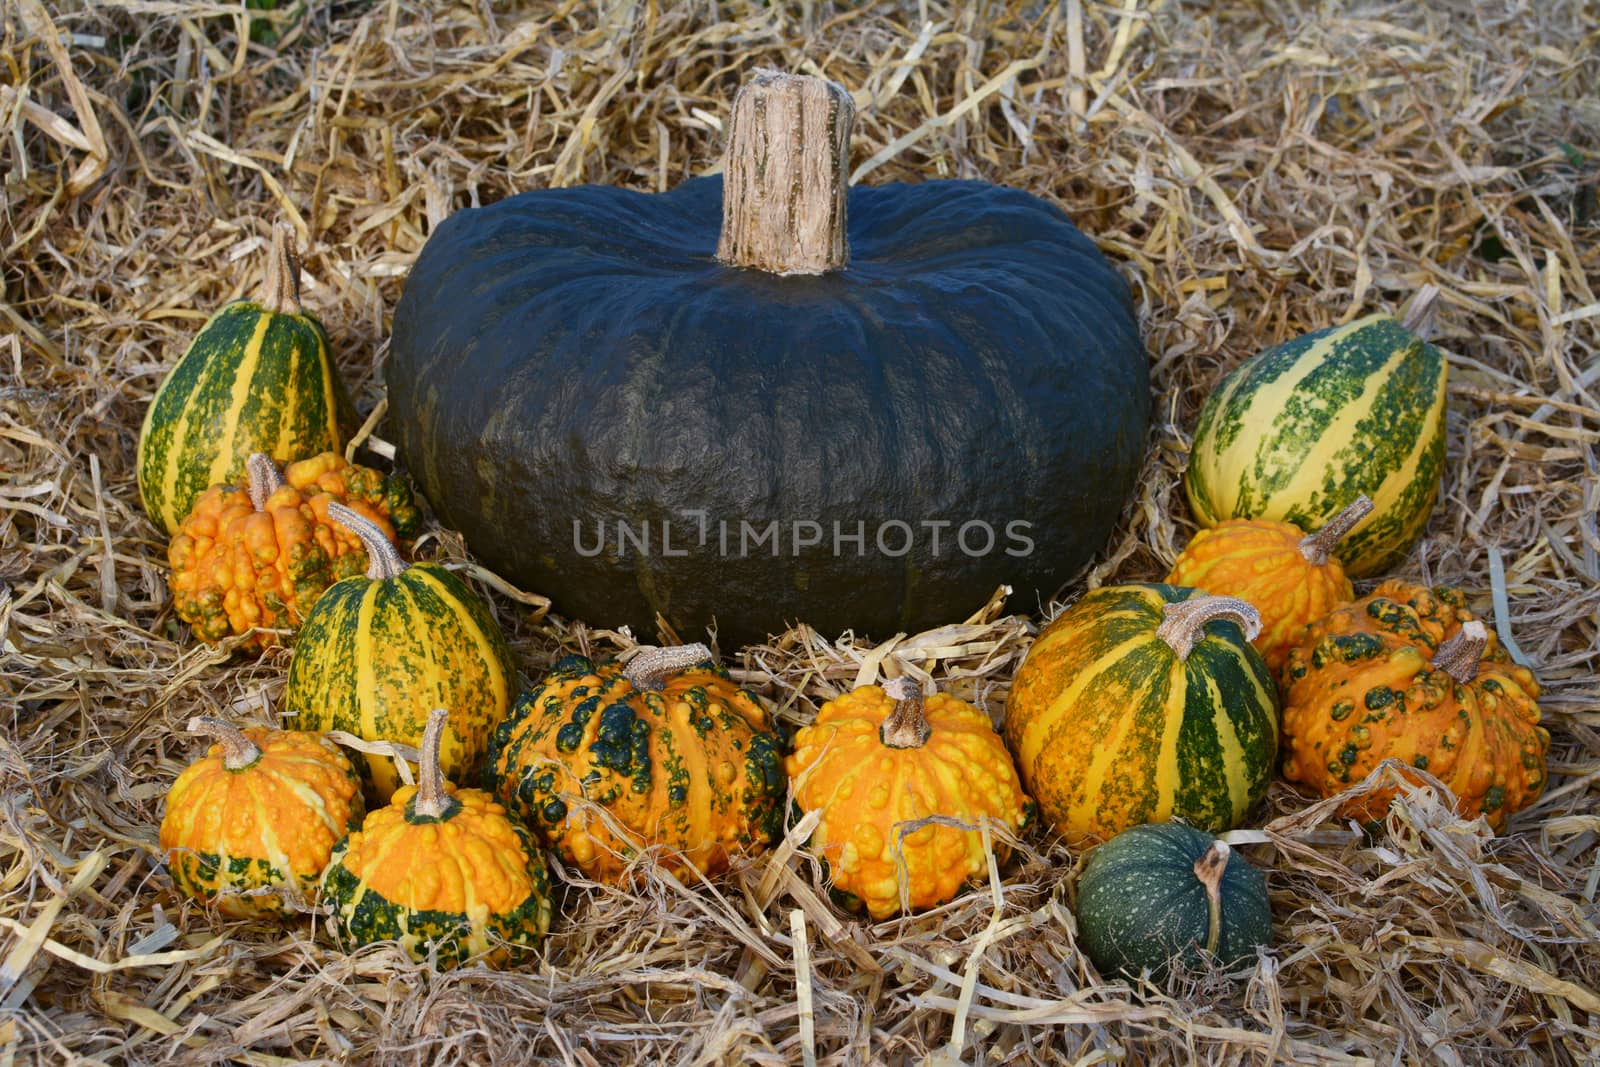 Large dark green squash surrounded by unusual ornamental warted gourds in a bed of fresh straw